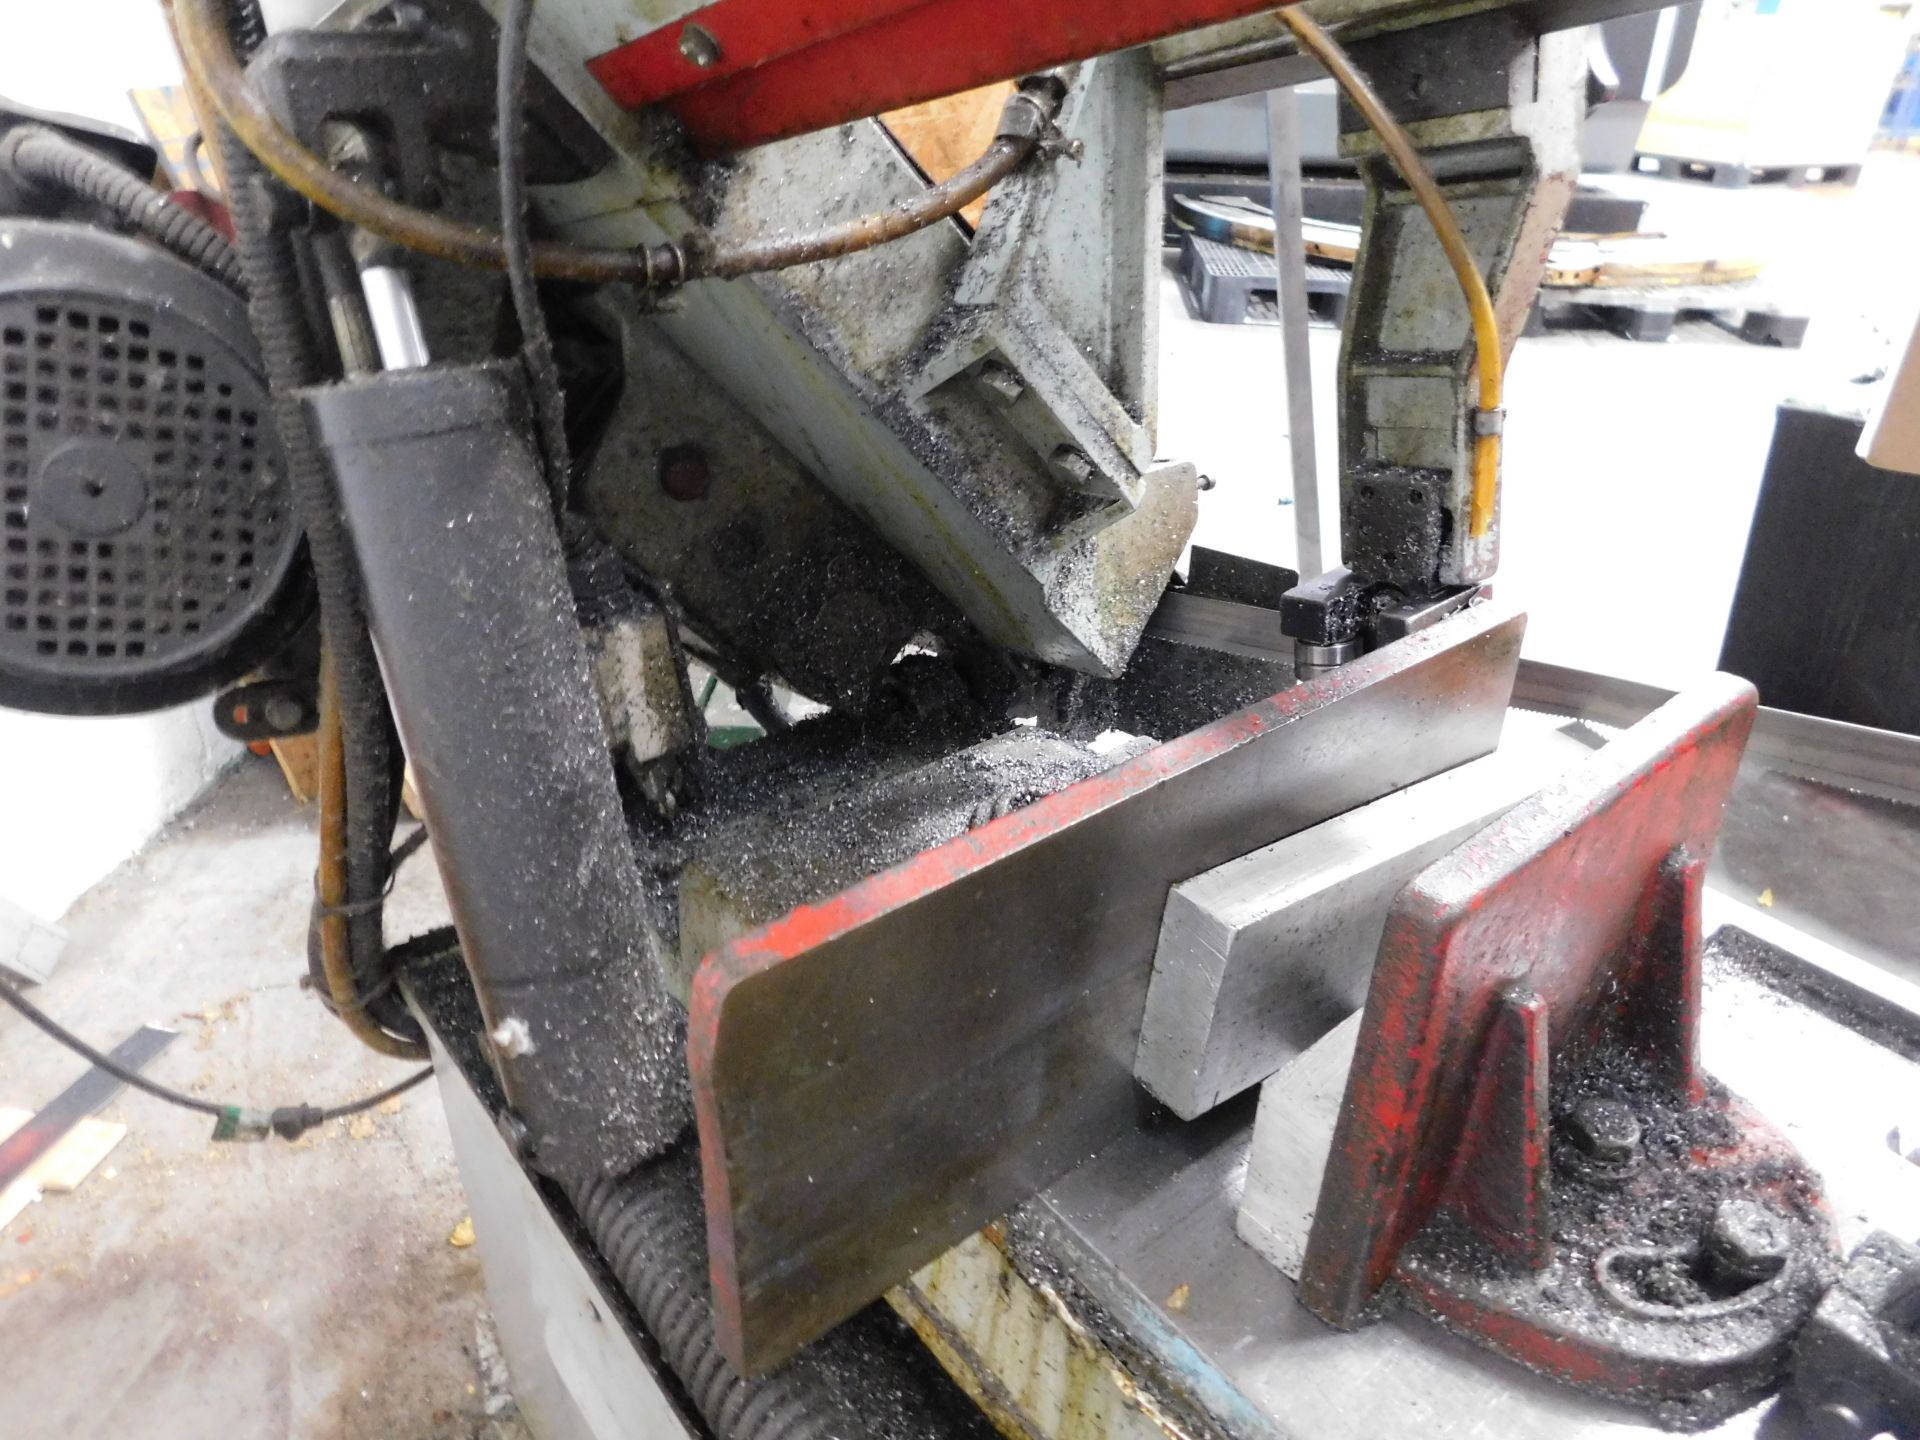 XYZ 260 10in Metal Horizontal Band Saw, Serial Number 00111220 (2000)  (Located North Manchester. - Image 8 of 10